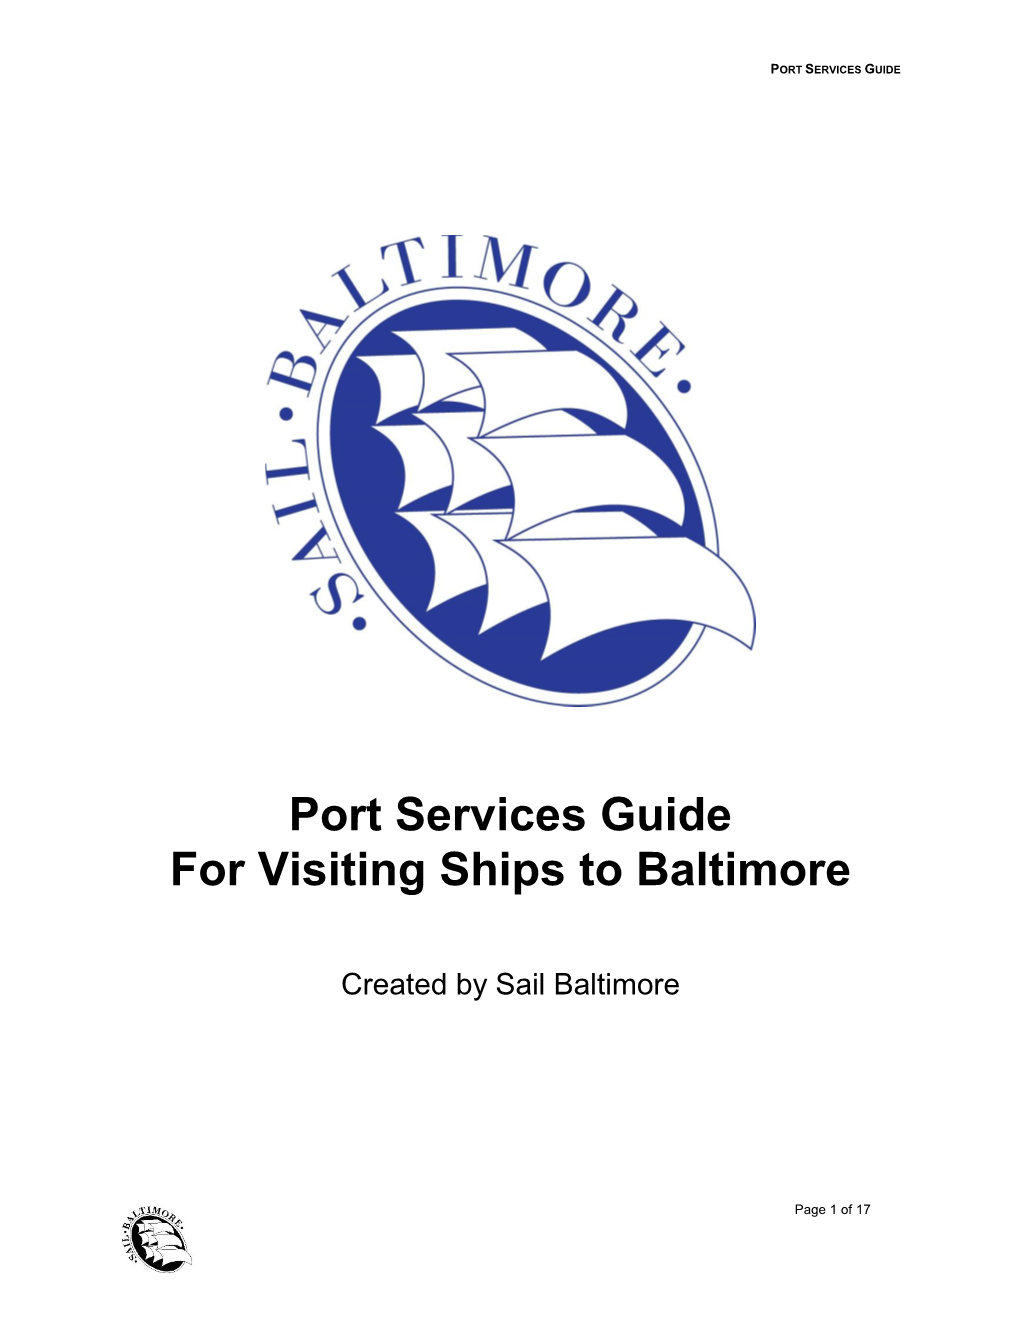 Port Services Guide for Visiting Ships to Baltimore